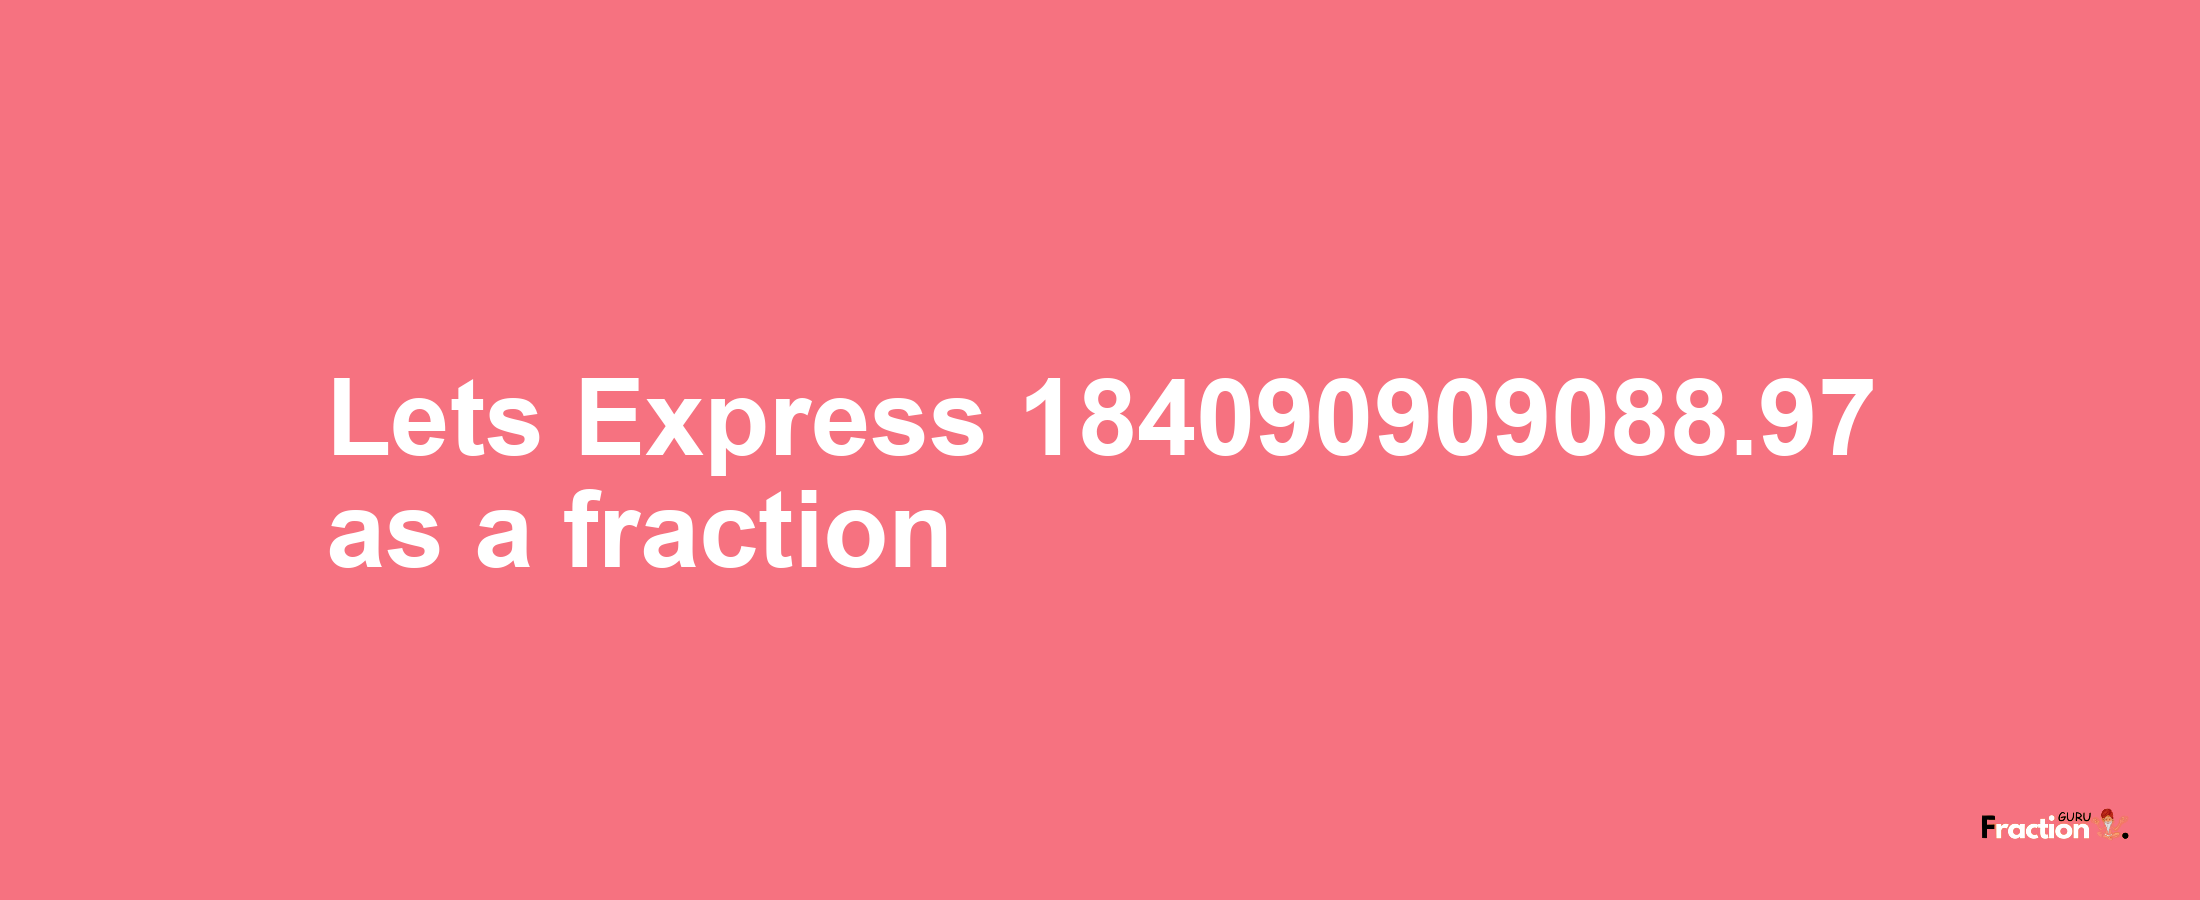 Lets Express 184090909088.97 as afraction